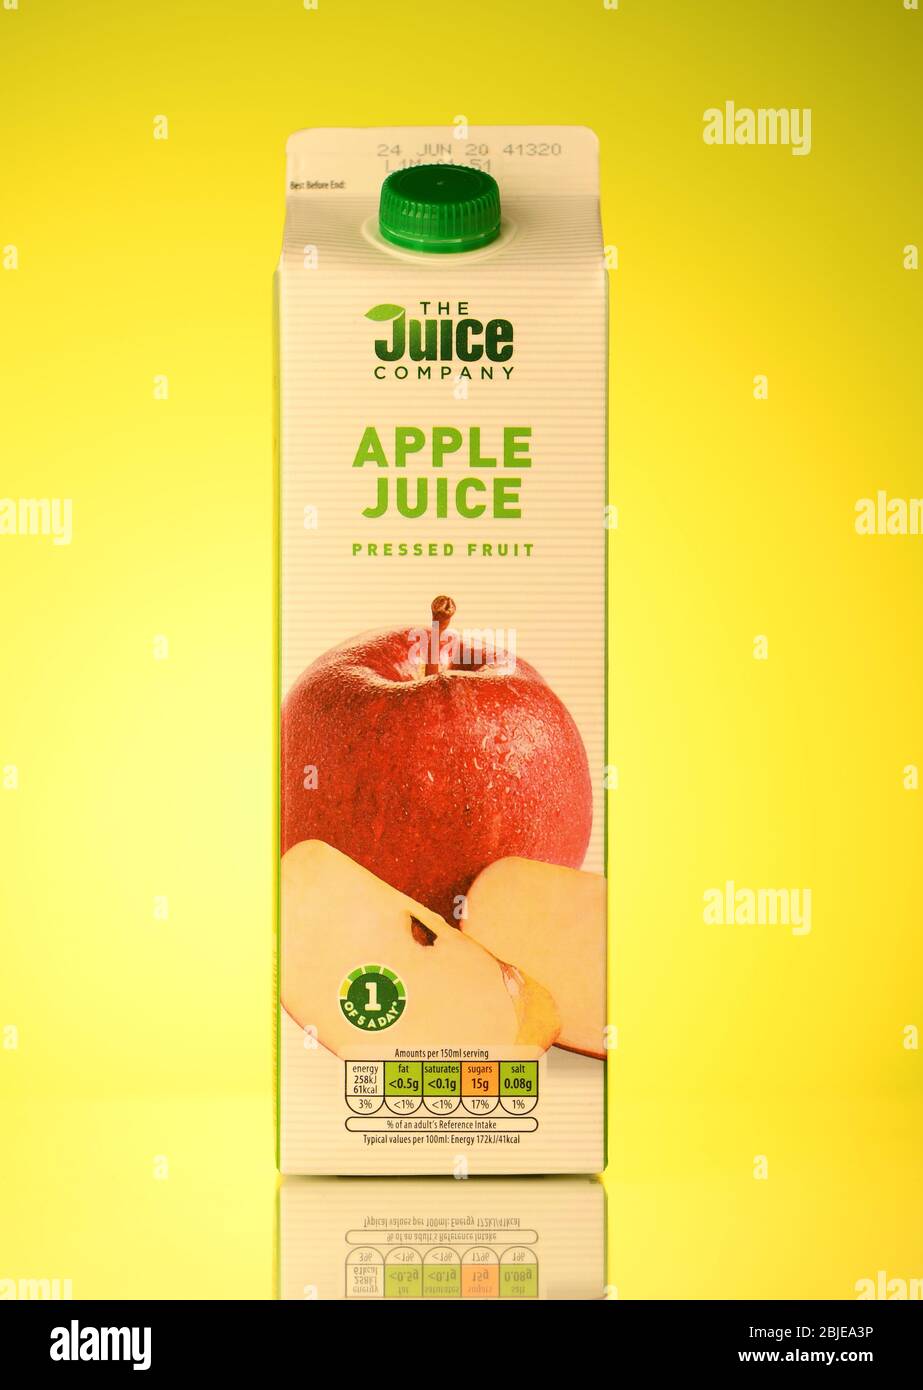 The Juice company Apple juice carton drink isolated on a spring yellow background with reflection. Stock Photo